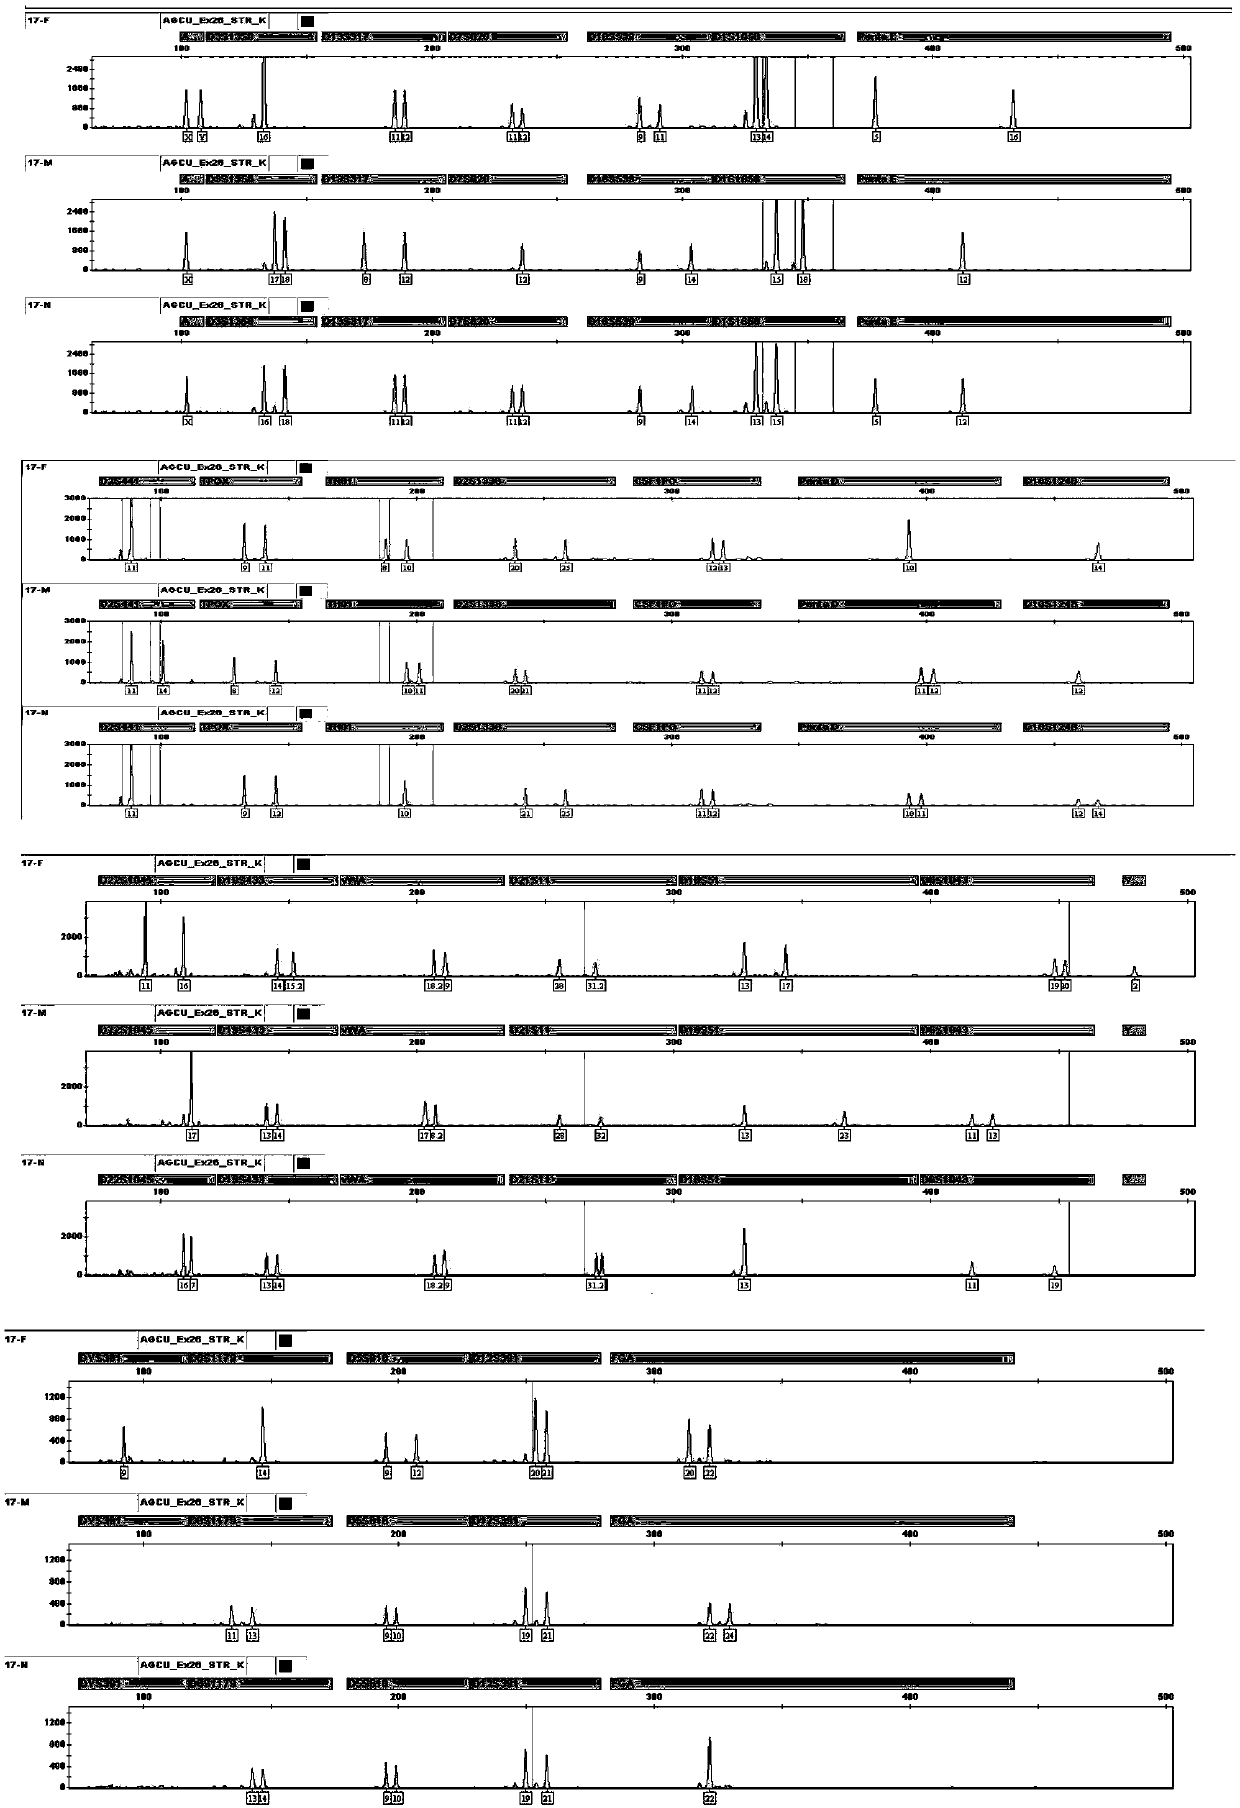 A kit for simultaneous analysis of 26 loci of human genome DNA by fluorescent labeling compound amplification and its use method and application